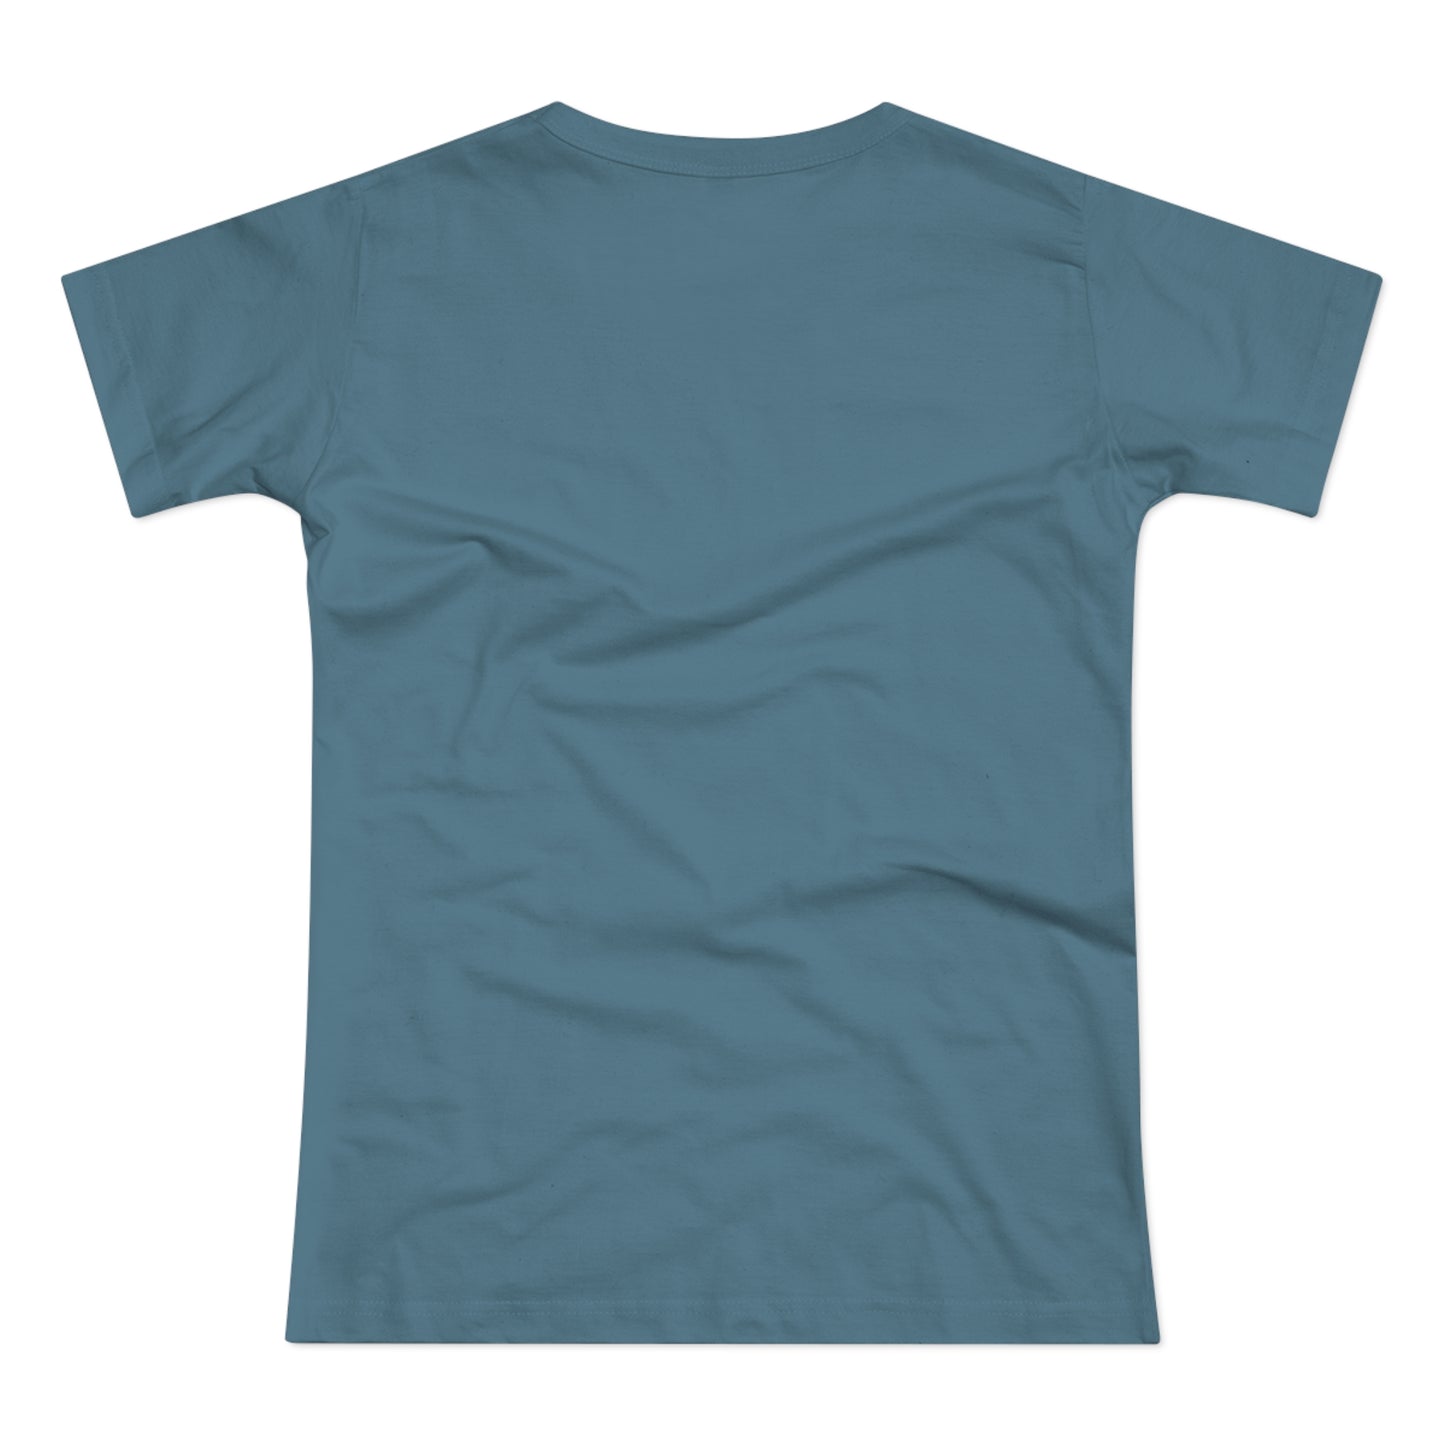 a blue t - shirt with a white background